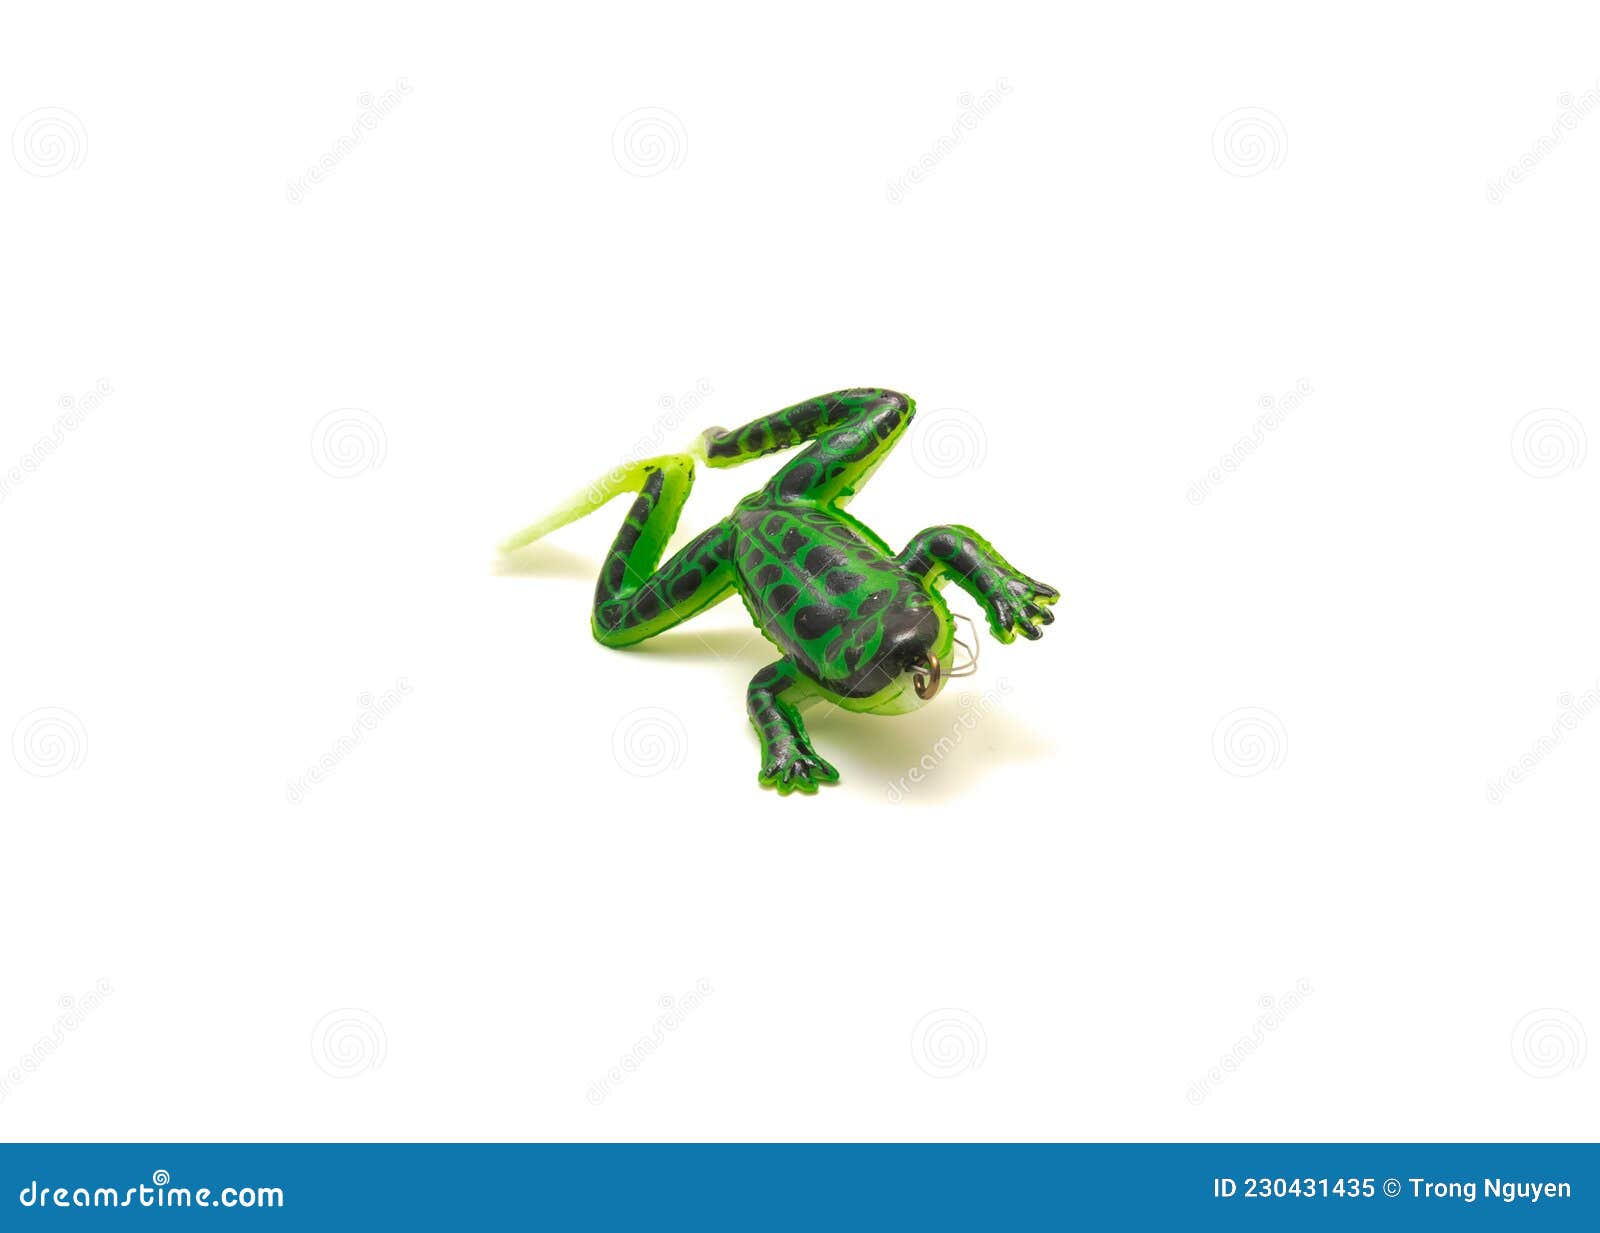 https://thumbs.dreamstime.com/z/close-up-artificial-top-water-frogs-lure-sharp-hook-stainless-steel-wire-guard-isolated-white-top-view-artificial-top-230431435.jpg